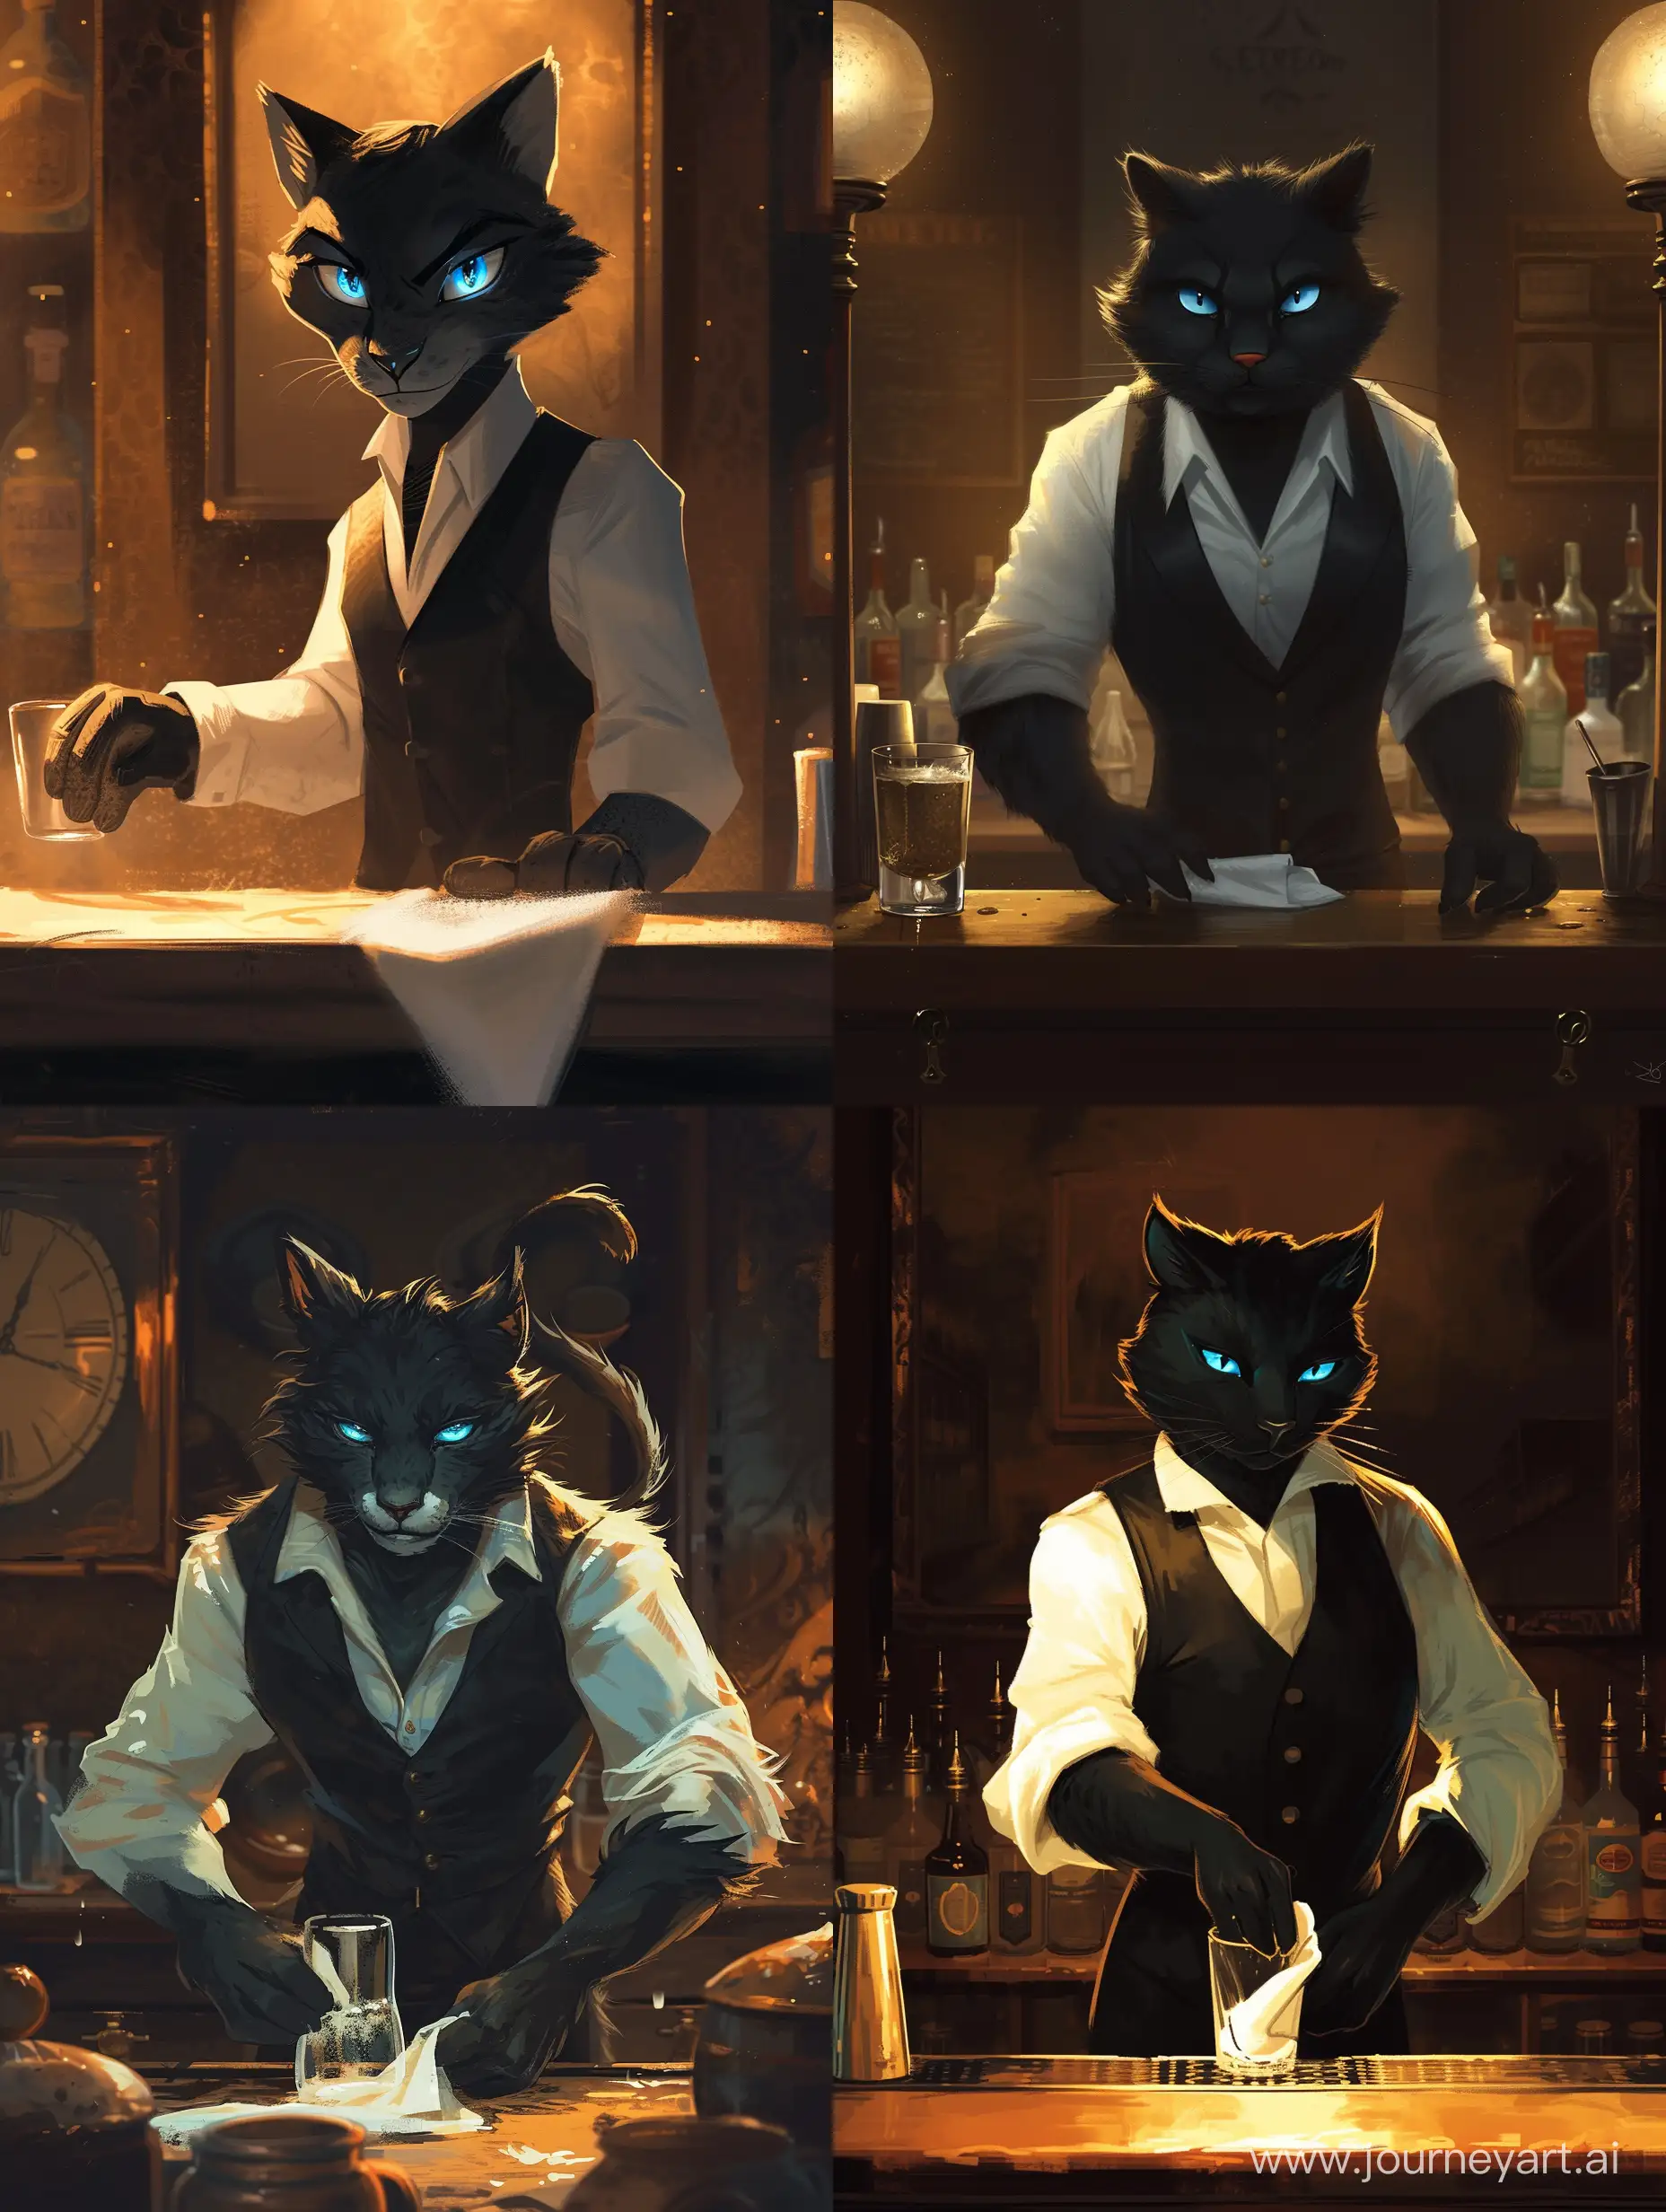 style: an old cartoon illustration; the hero: an anthropomorphic furry slim black cat with bright blue eyes, he is a bartender in a white shirt and black vest, serious, he wipes the glass with a cloth; he stands behind the bar, the environment is dark and ranged light,